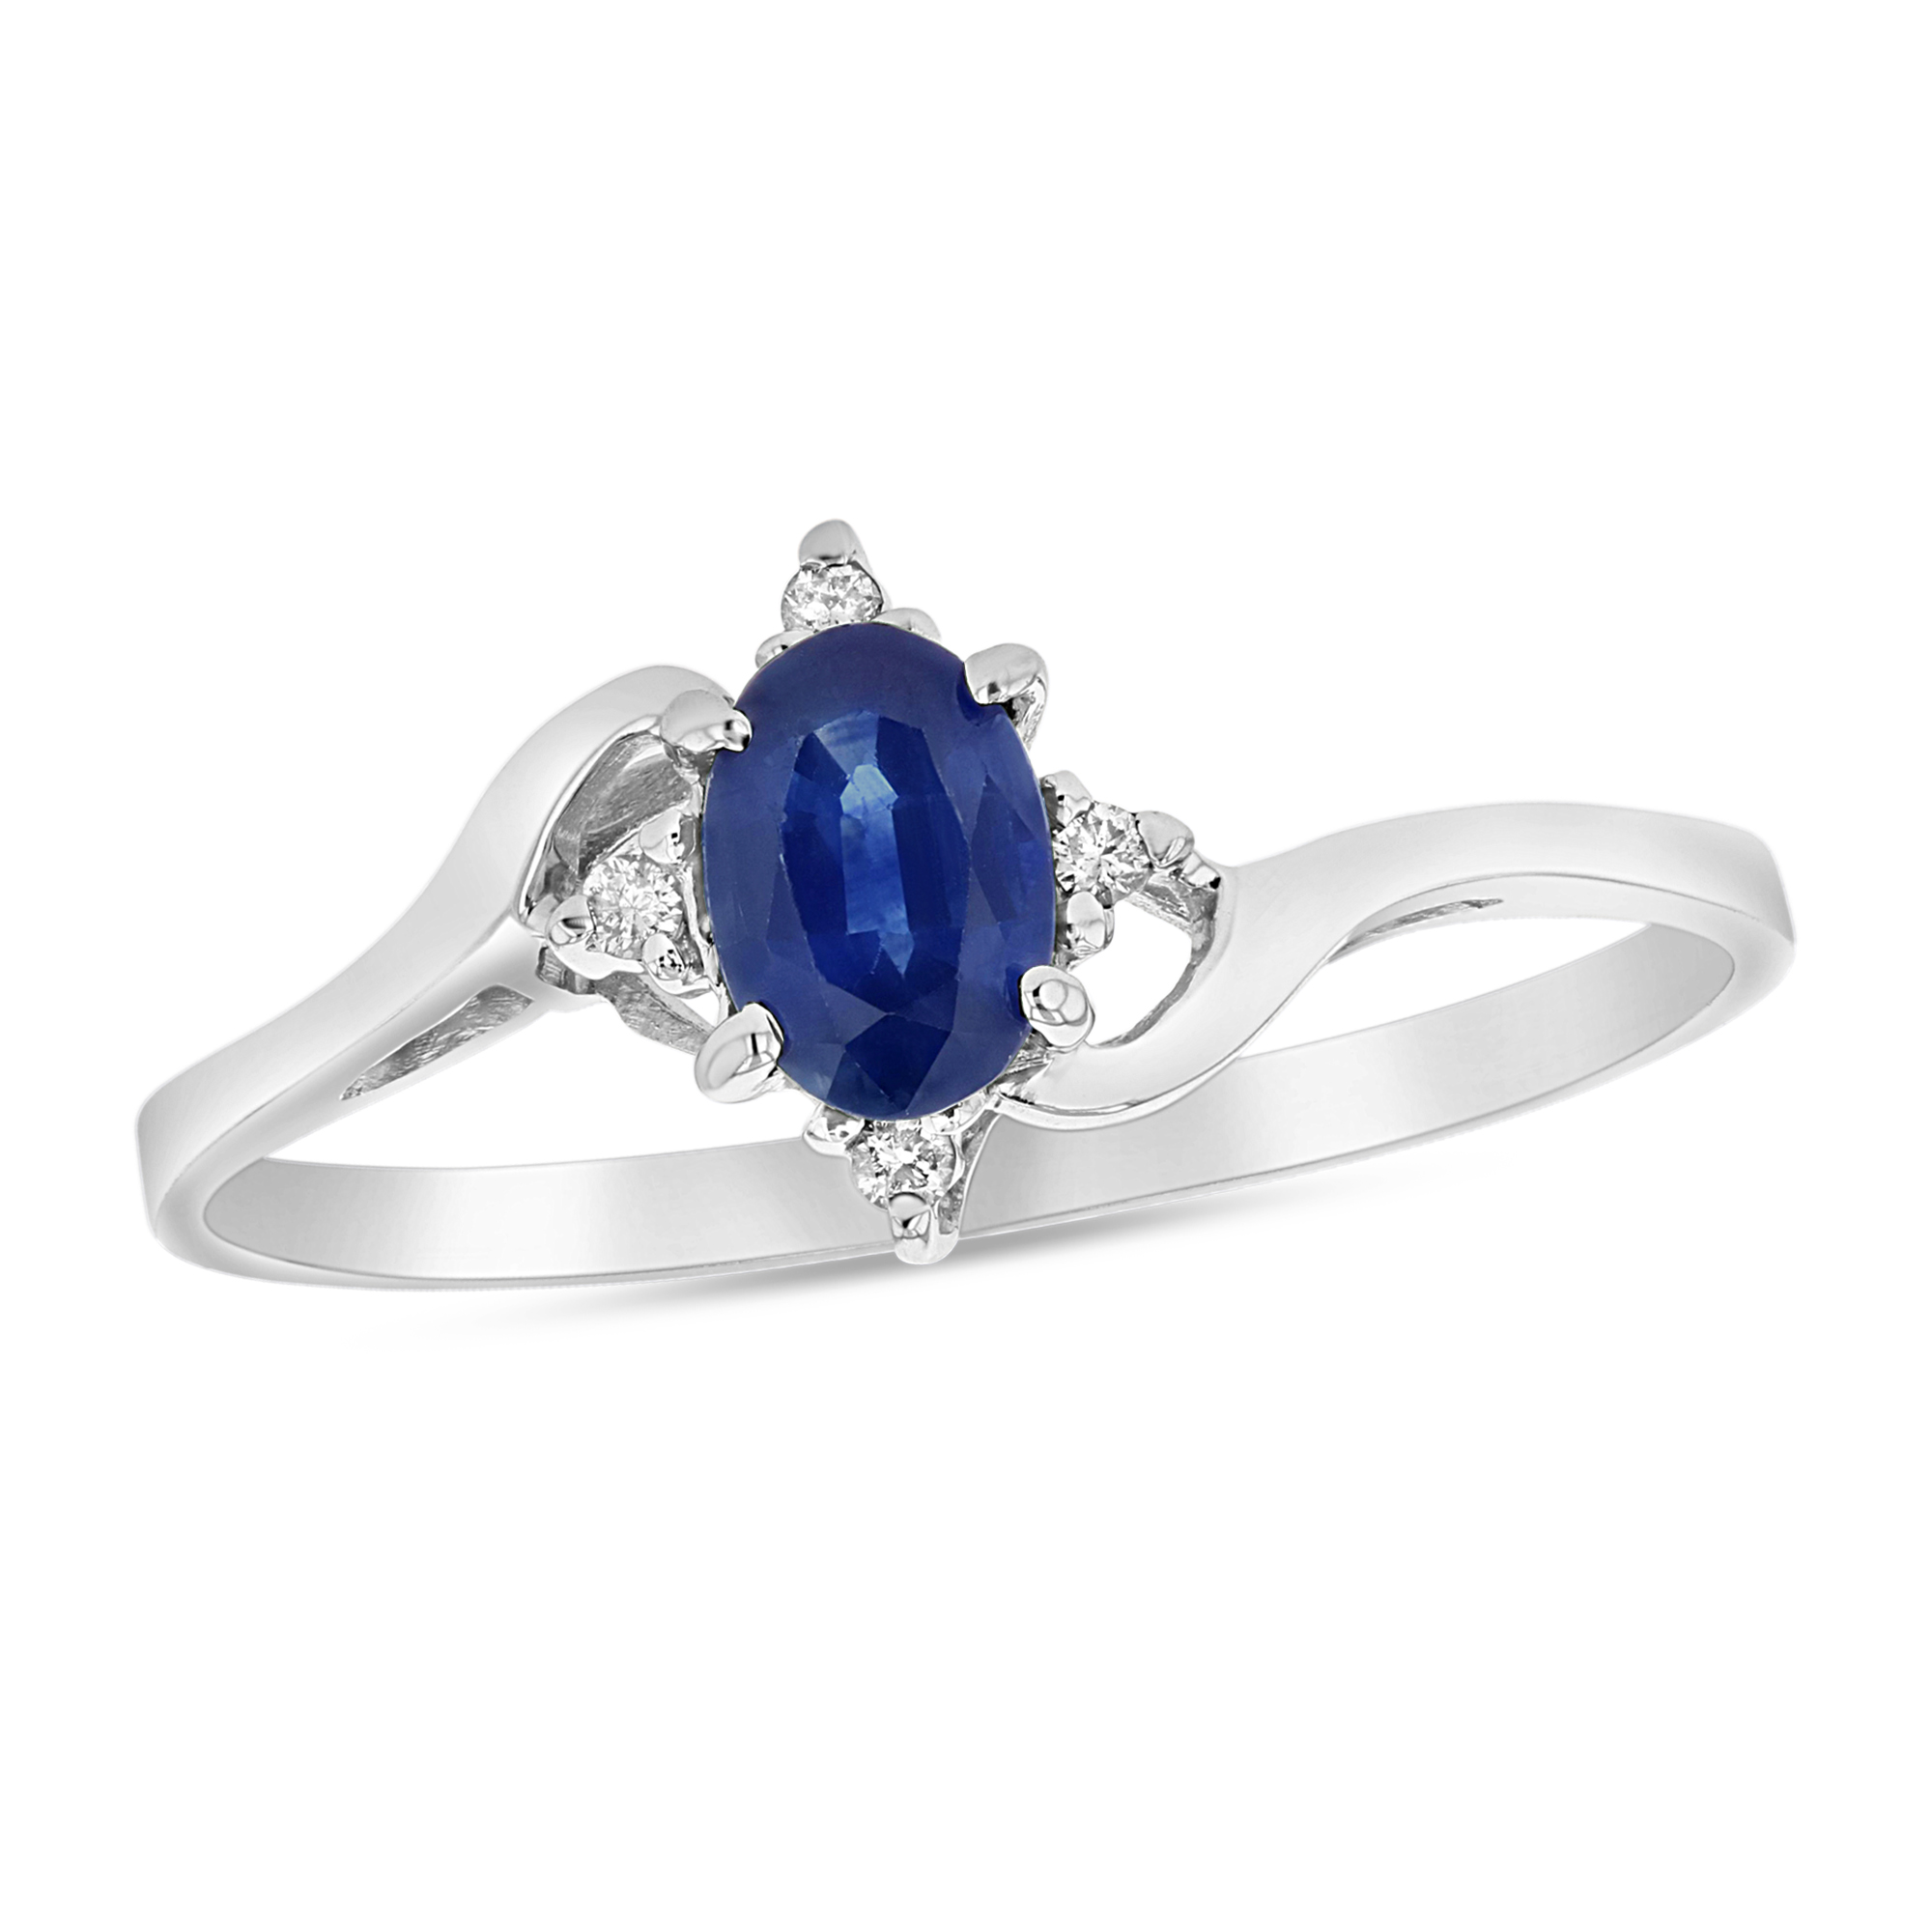 0.43ctw Oval Sapphire and Diamond Ring set in 14k Gold